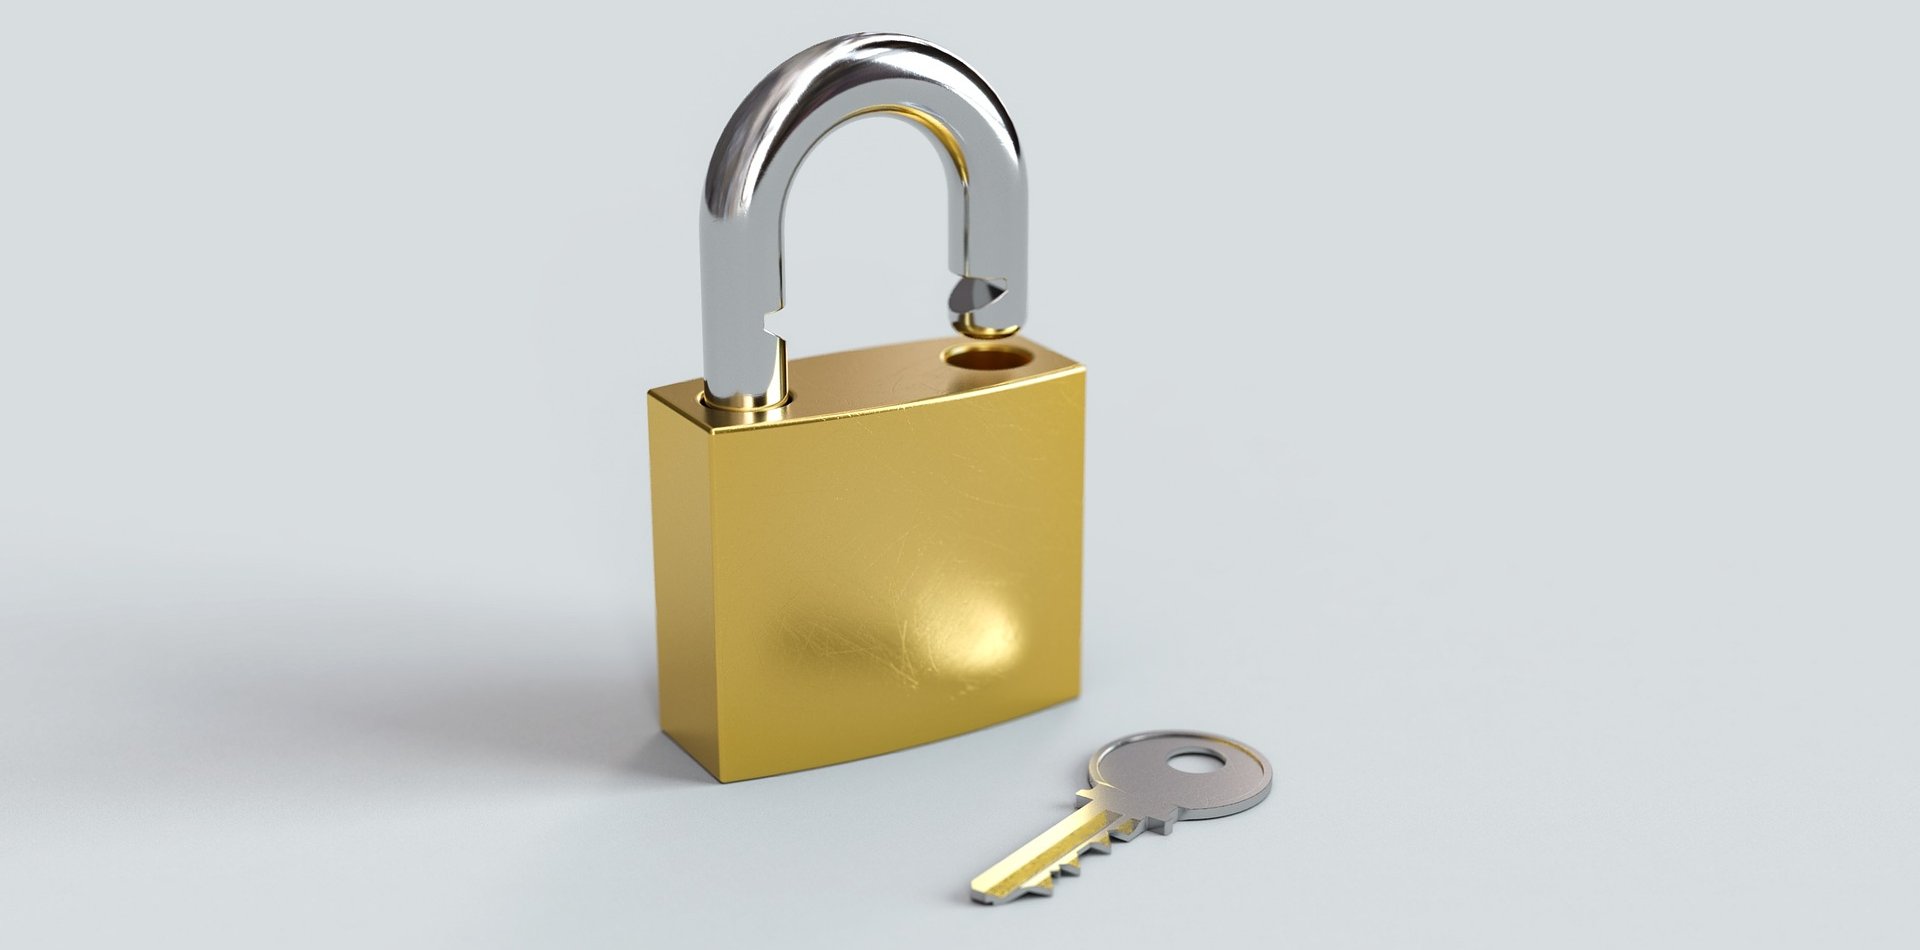 An open padlock and a key